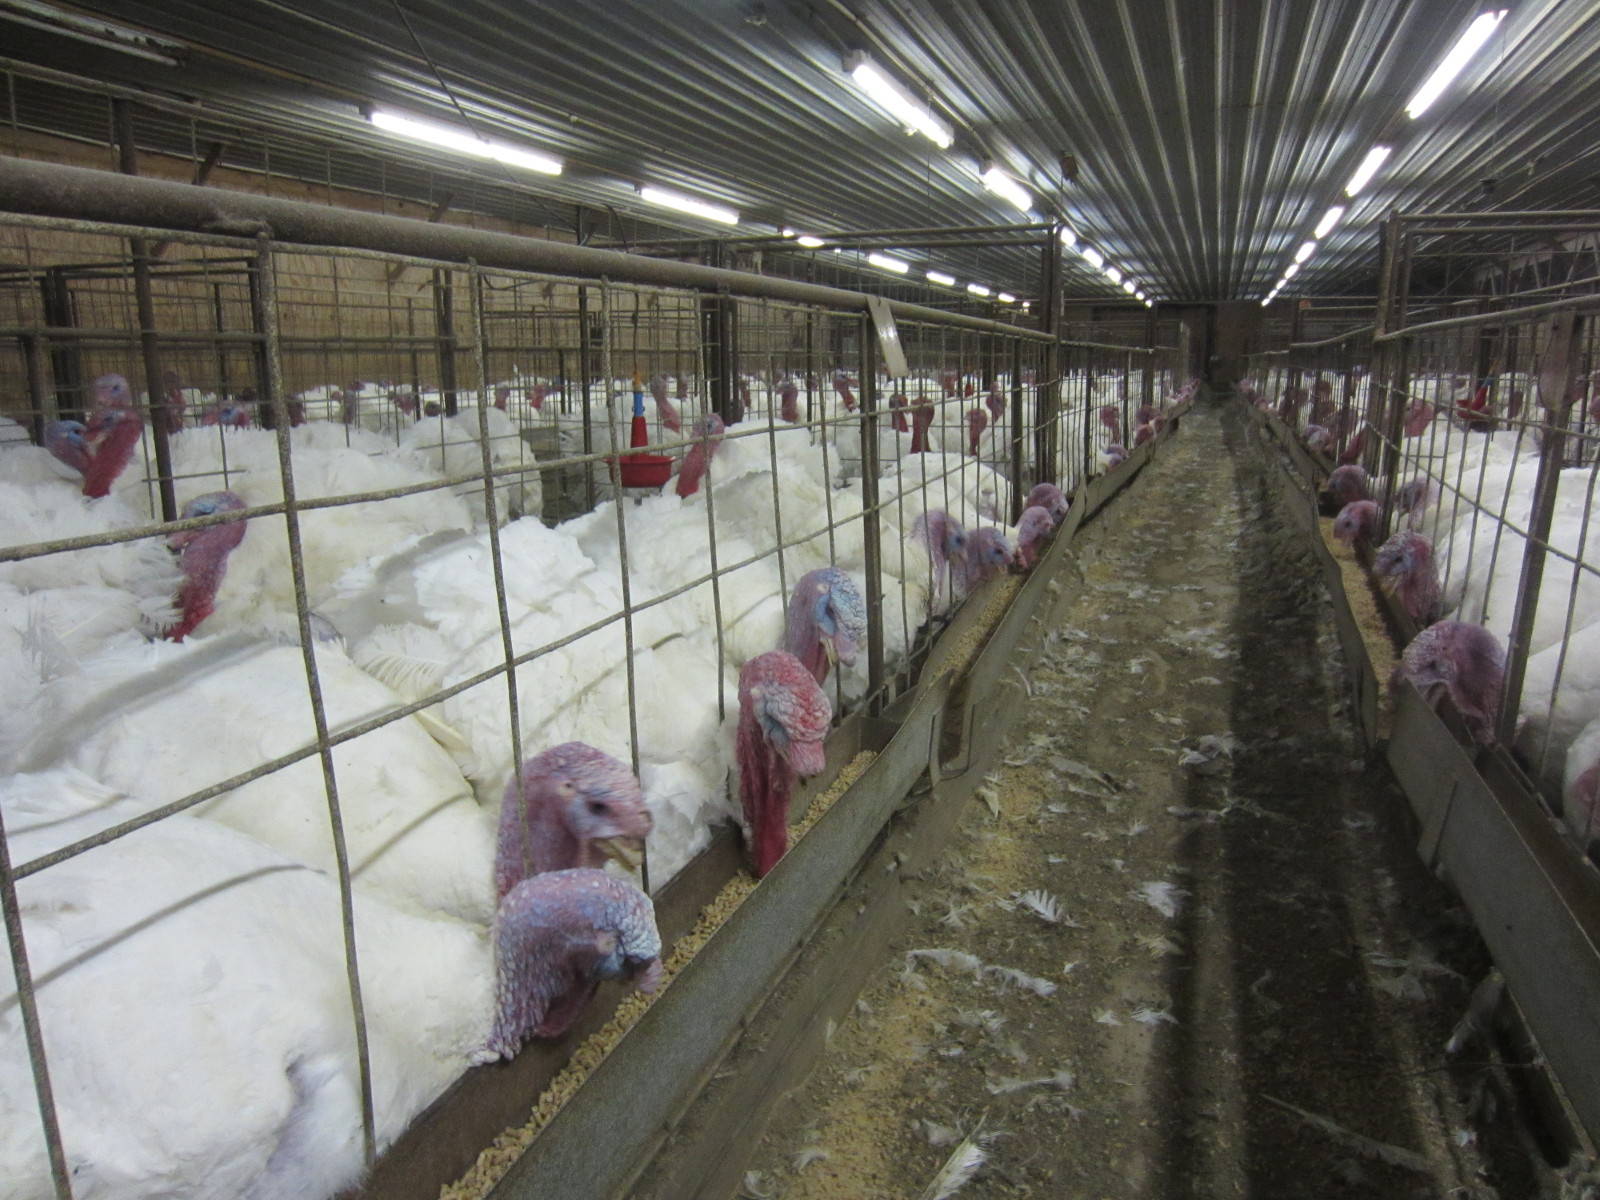 5 Alarming Facts about Antibiotic Resistance and Factory Farming